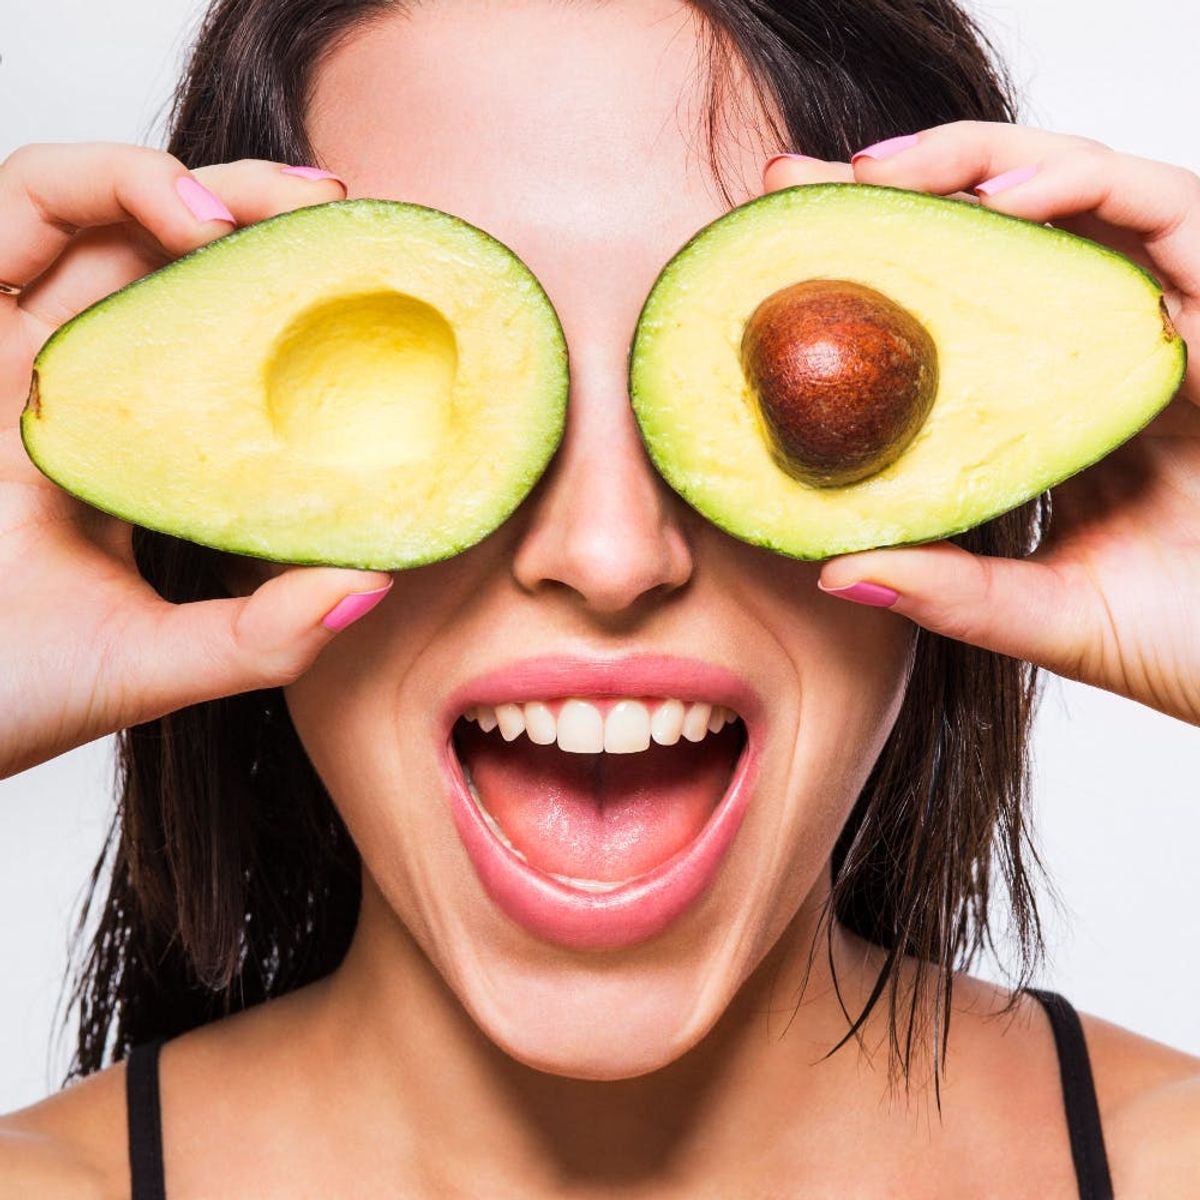 This One Tiny Thing Will Let You Pick the Perfect Avocado Every Time